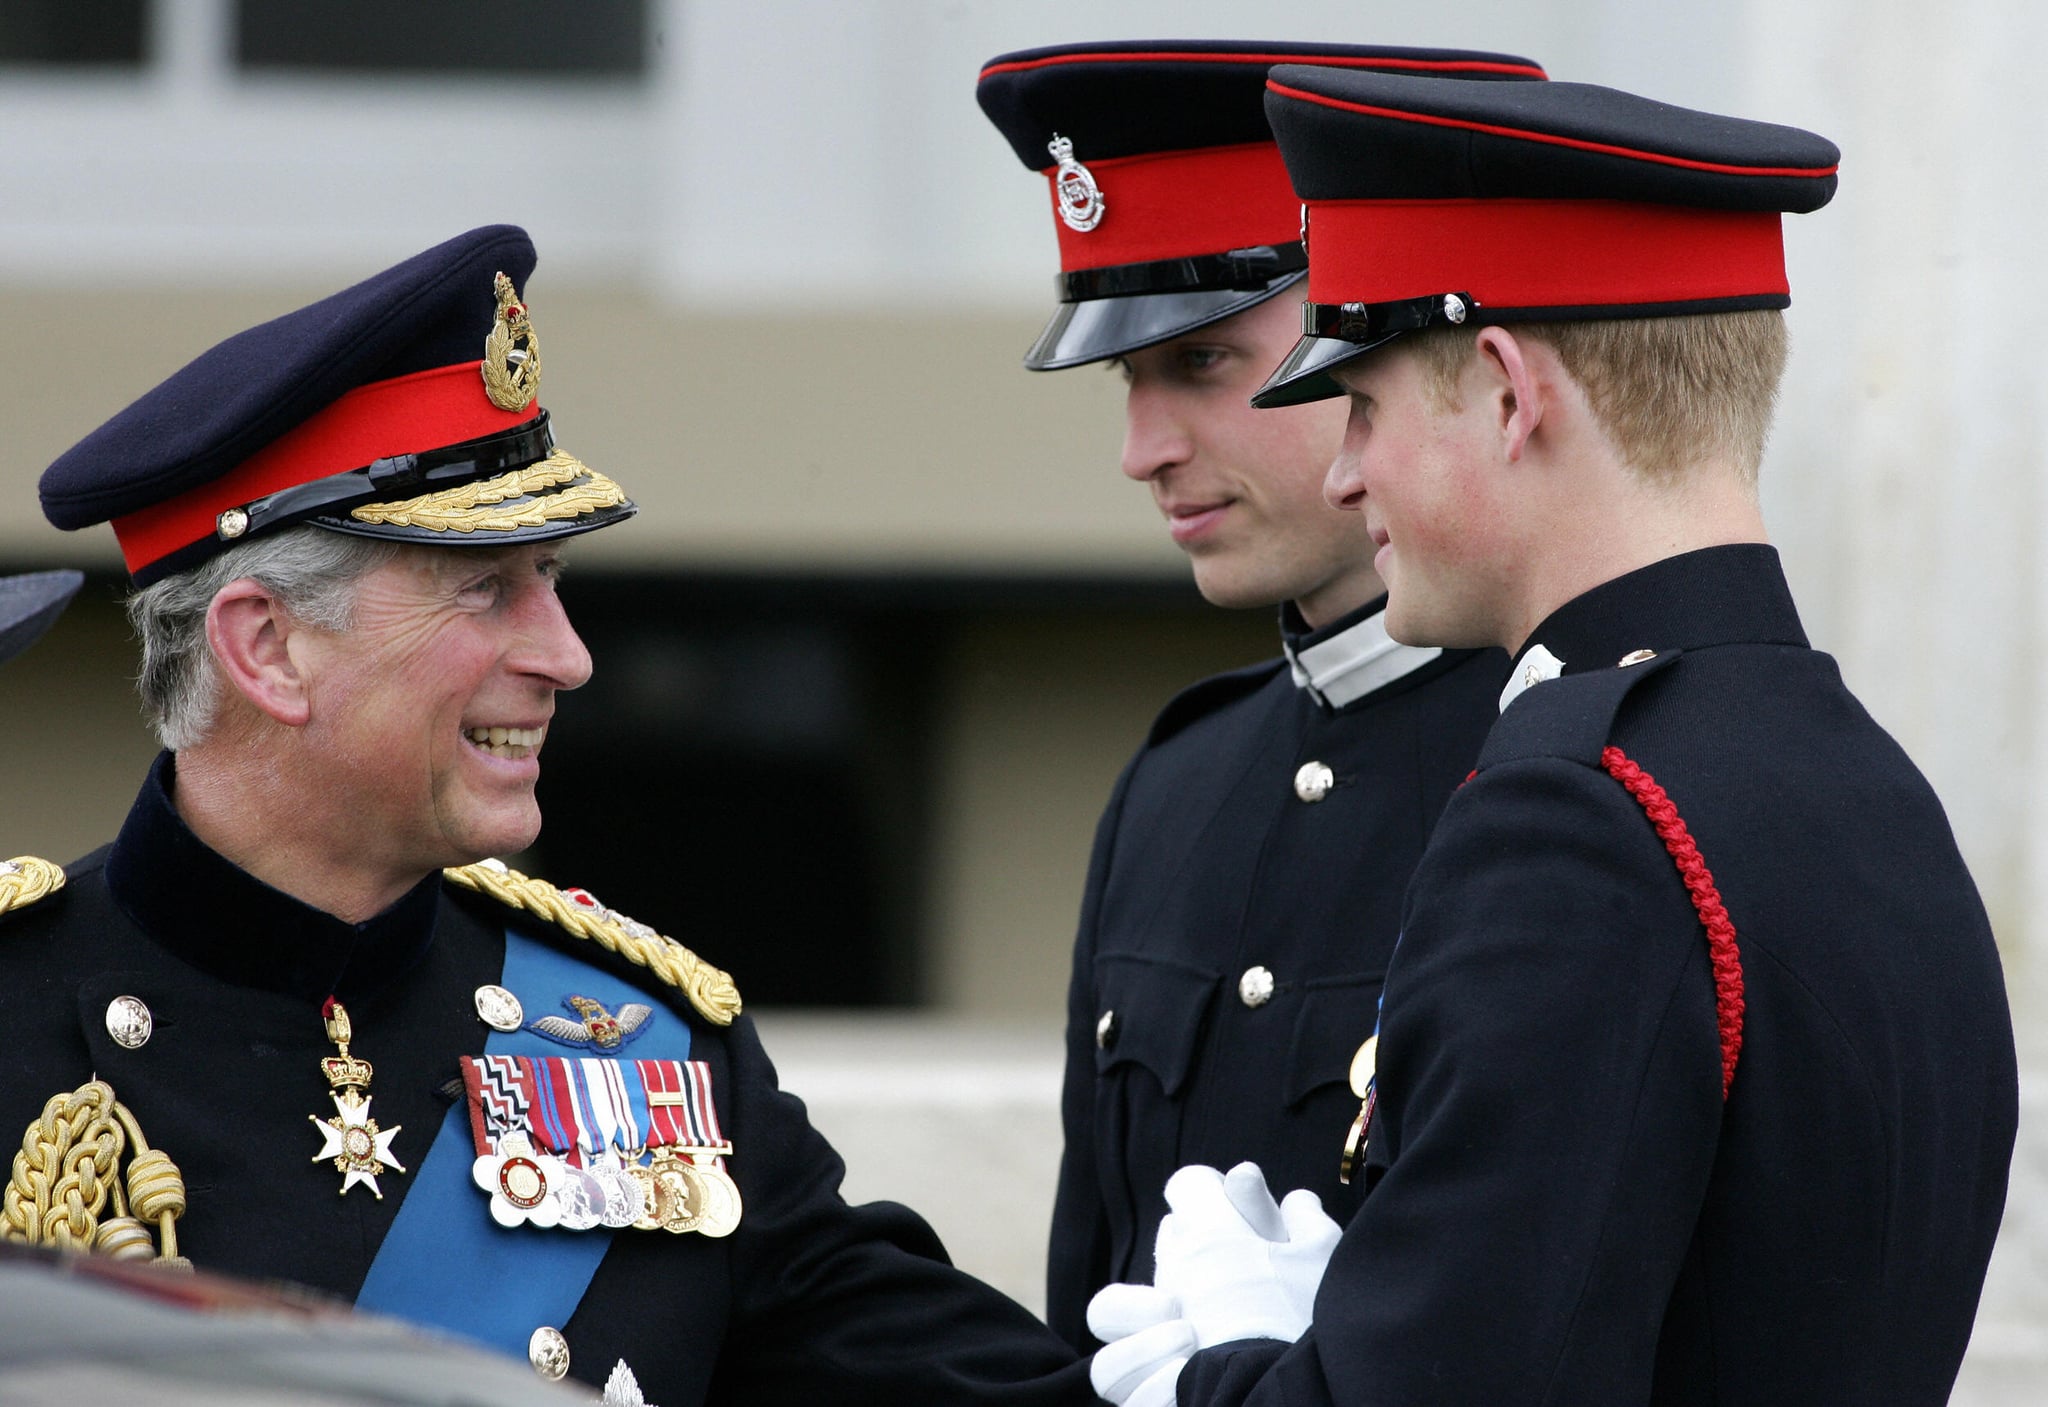 Sandhurst, UNITED KINGDOM:  Britain's Prince Charles (L) speaks with his two sons Prince's William (C) and Harry (R) after attending the Sovereign's Parade at the Royal Military Academy in Sandhurst, southern England, April 12, 2006. Officer Cadet H Wales as Prince Harry is known, will train to become a troop commander, in charge of 11 enlisted men and four light tanks -- a job that could soon see him on front-line duty in Iraq or Afghanistan. His grandmother Queen Elizabeth II, who turns 80 on April 21, and father Prince Charles both turned out for the passing-out ceremony where Harry and 218 other officer cadets in crisp blue uniforms, each carrying thin silver swords, received their commissions after 44 weeks of gruelling training. AFP PHOTO/CARL DE SOUZA  (Photo credit should read CARL DE SOUZA/AFP via Getty Images)